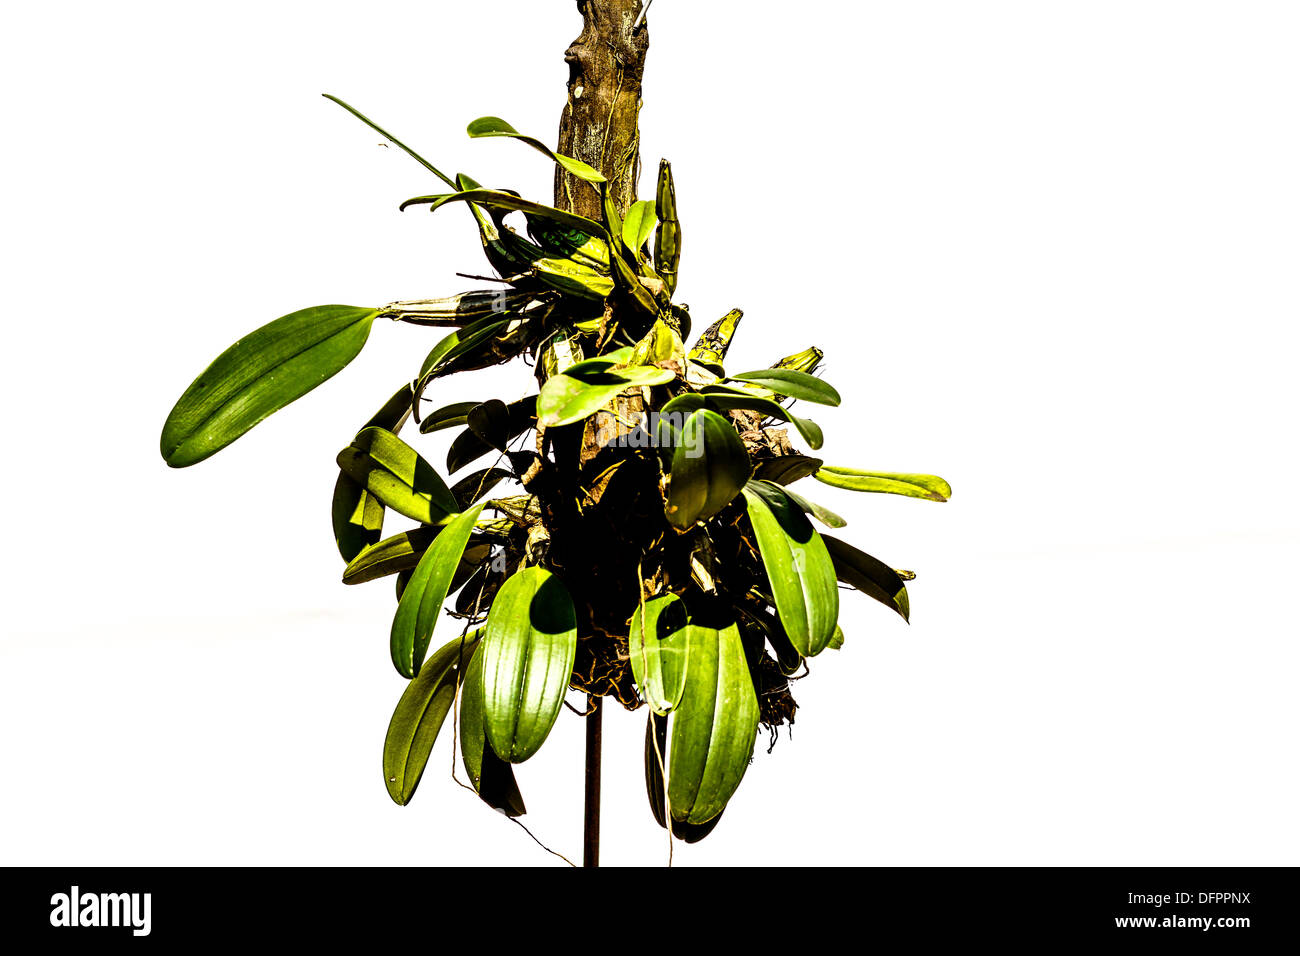 The Green orchids hanging on branches. Stock Photo